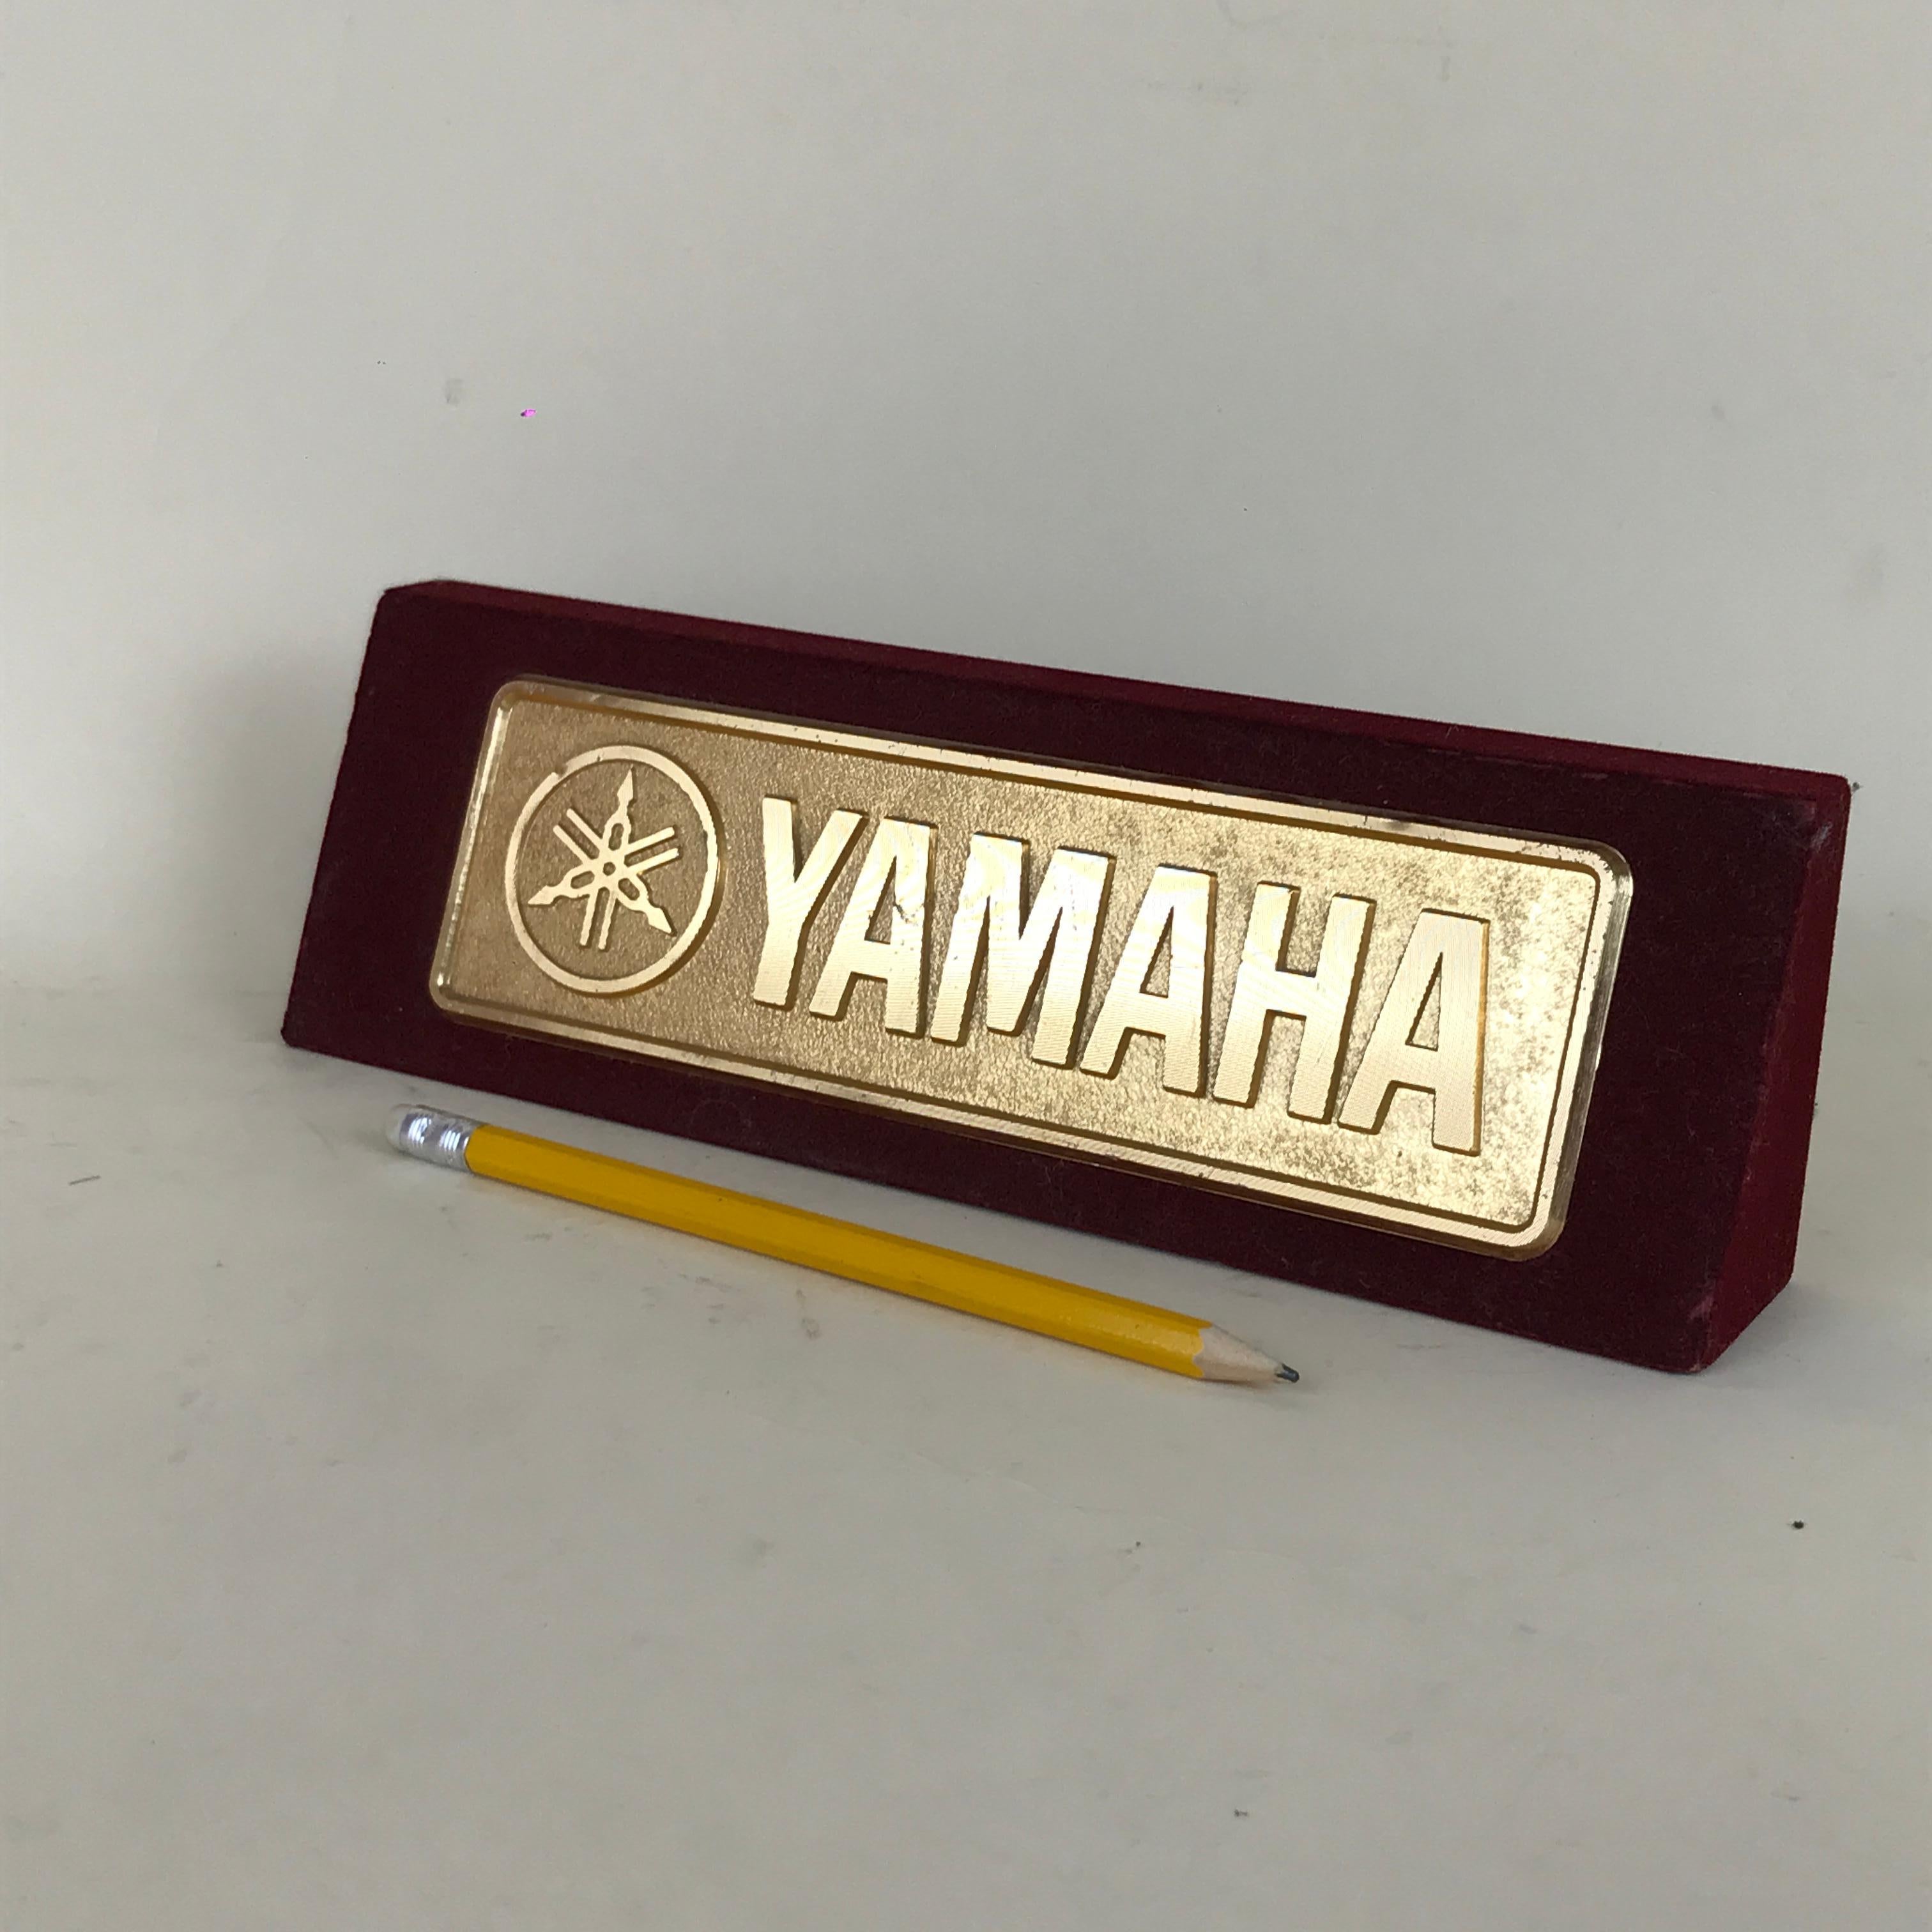 Vintage metal Yamaha logo display on bordeaux velvet.

Collector's note:

Yamaha Corporation is a Japanese multinational corporation and conglomerate with a very wide range of products and services, predominantly musical instruments, electronics